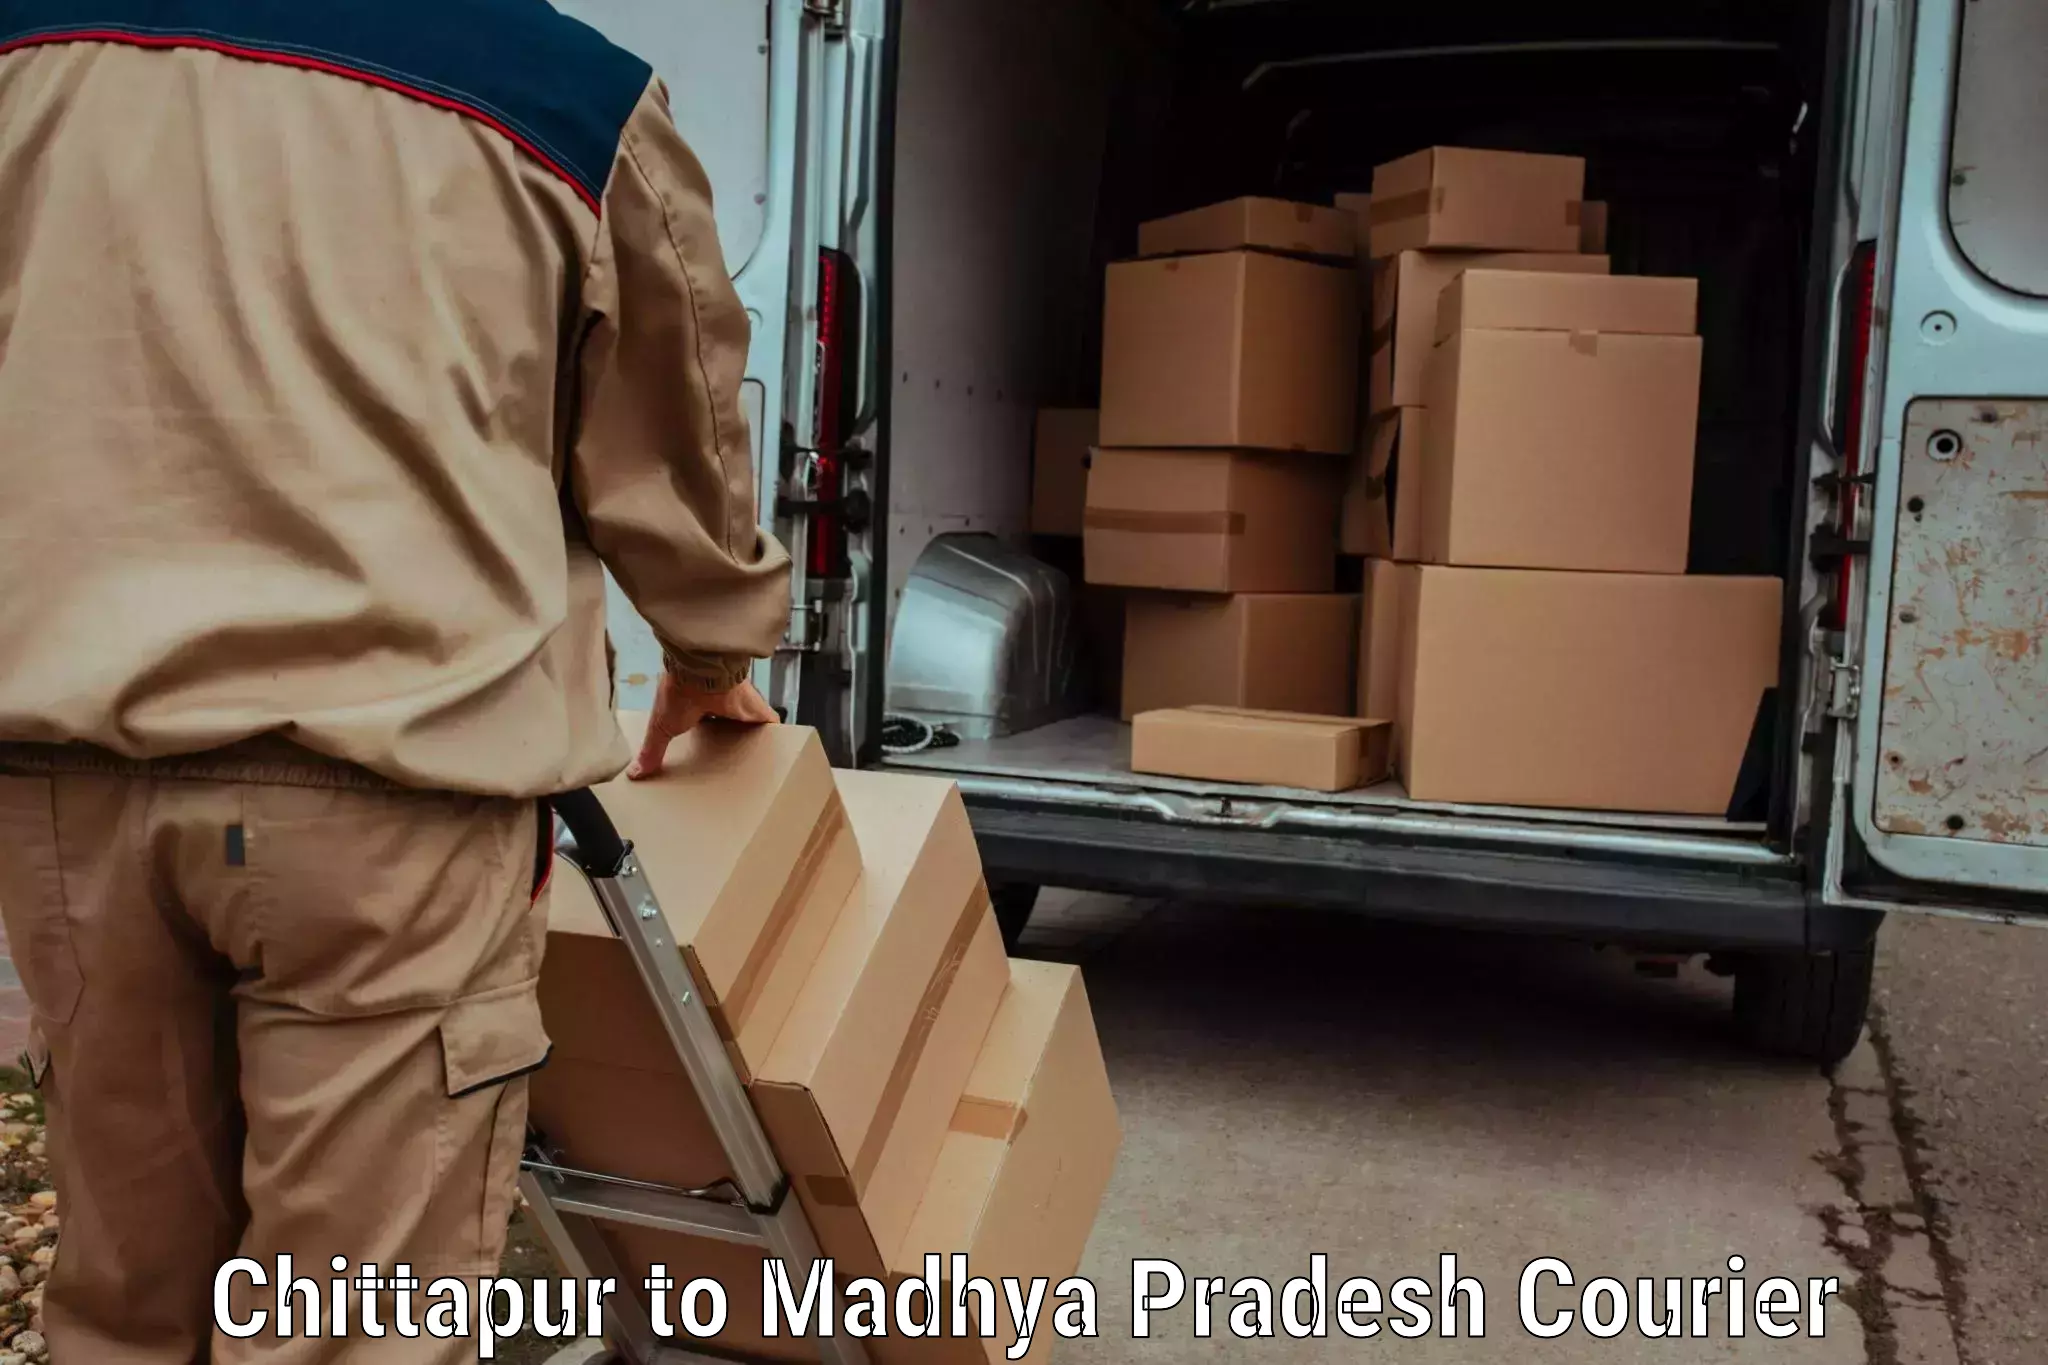 Speedy delivery service Chittapur to Gotegaon